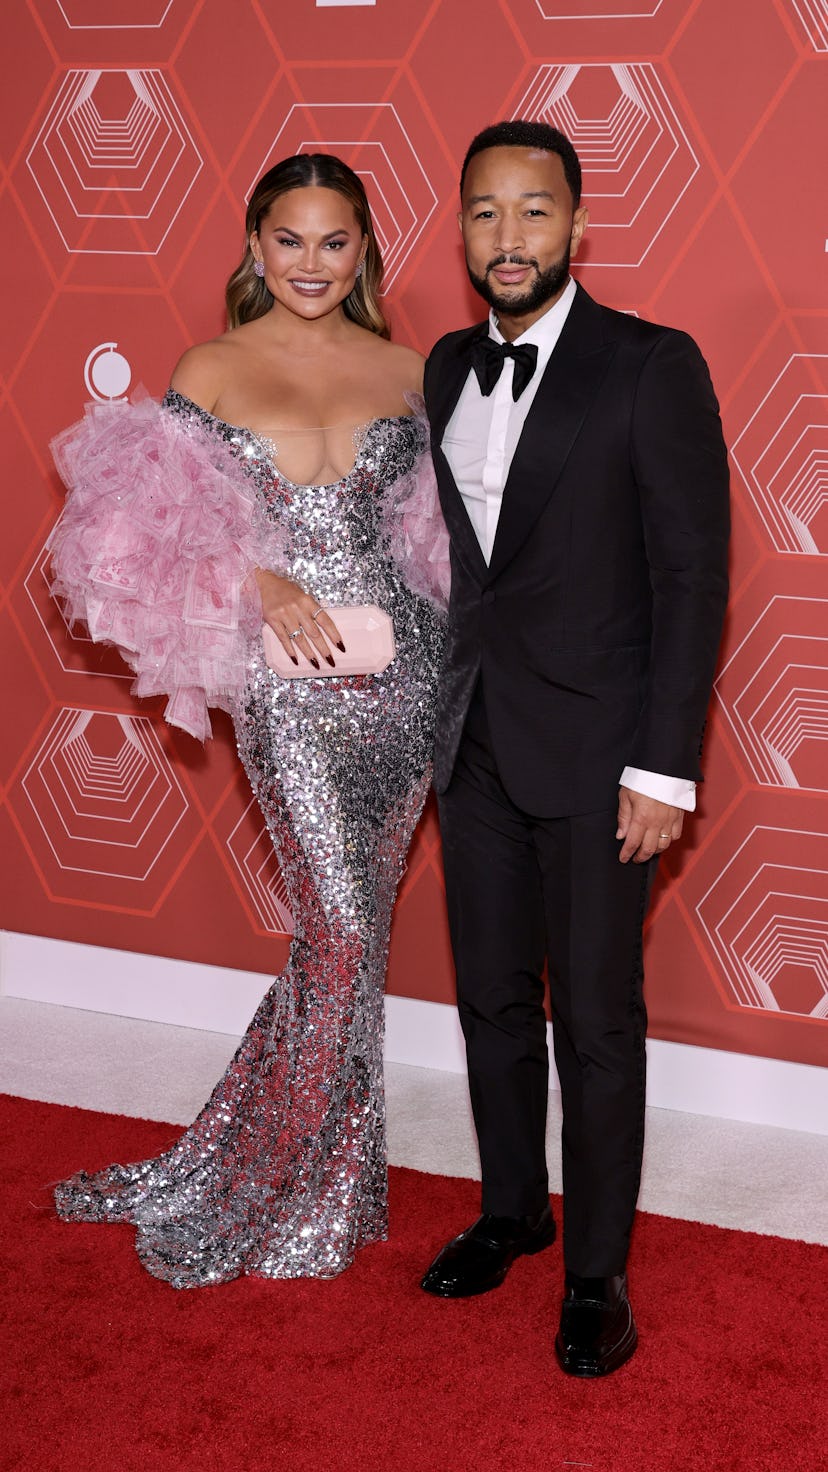 The 2021 Tonys red carpet looks were delightfully over-the-top, from Chrissy Teigen's sequin gown to...